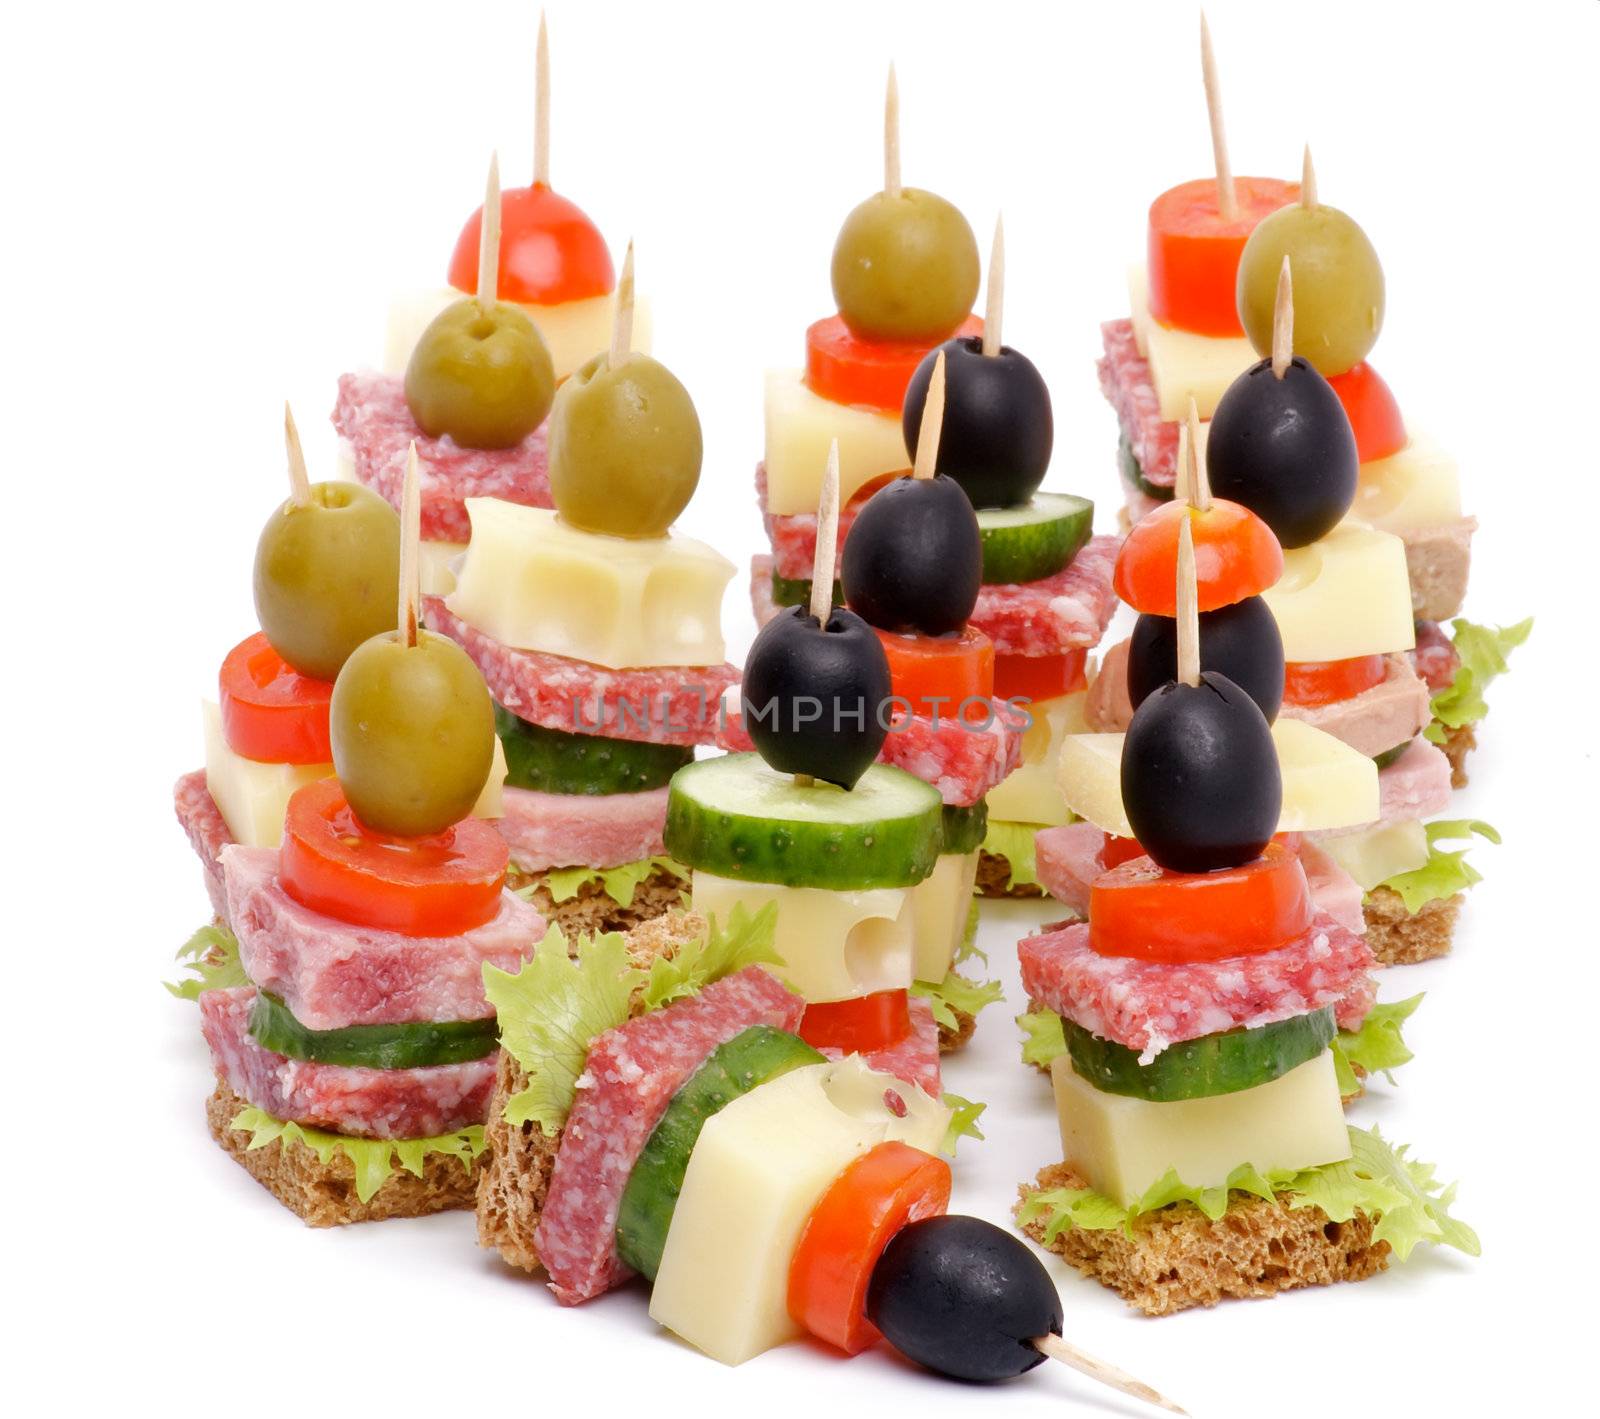 Arrangement of Canape with Bacon, Salami, Tomatoes, Cheese, Cucumber, Green Olive, Black Olive, Lettuce and Whole Grain Bread isolated on white background